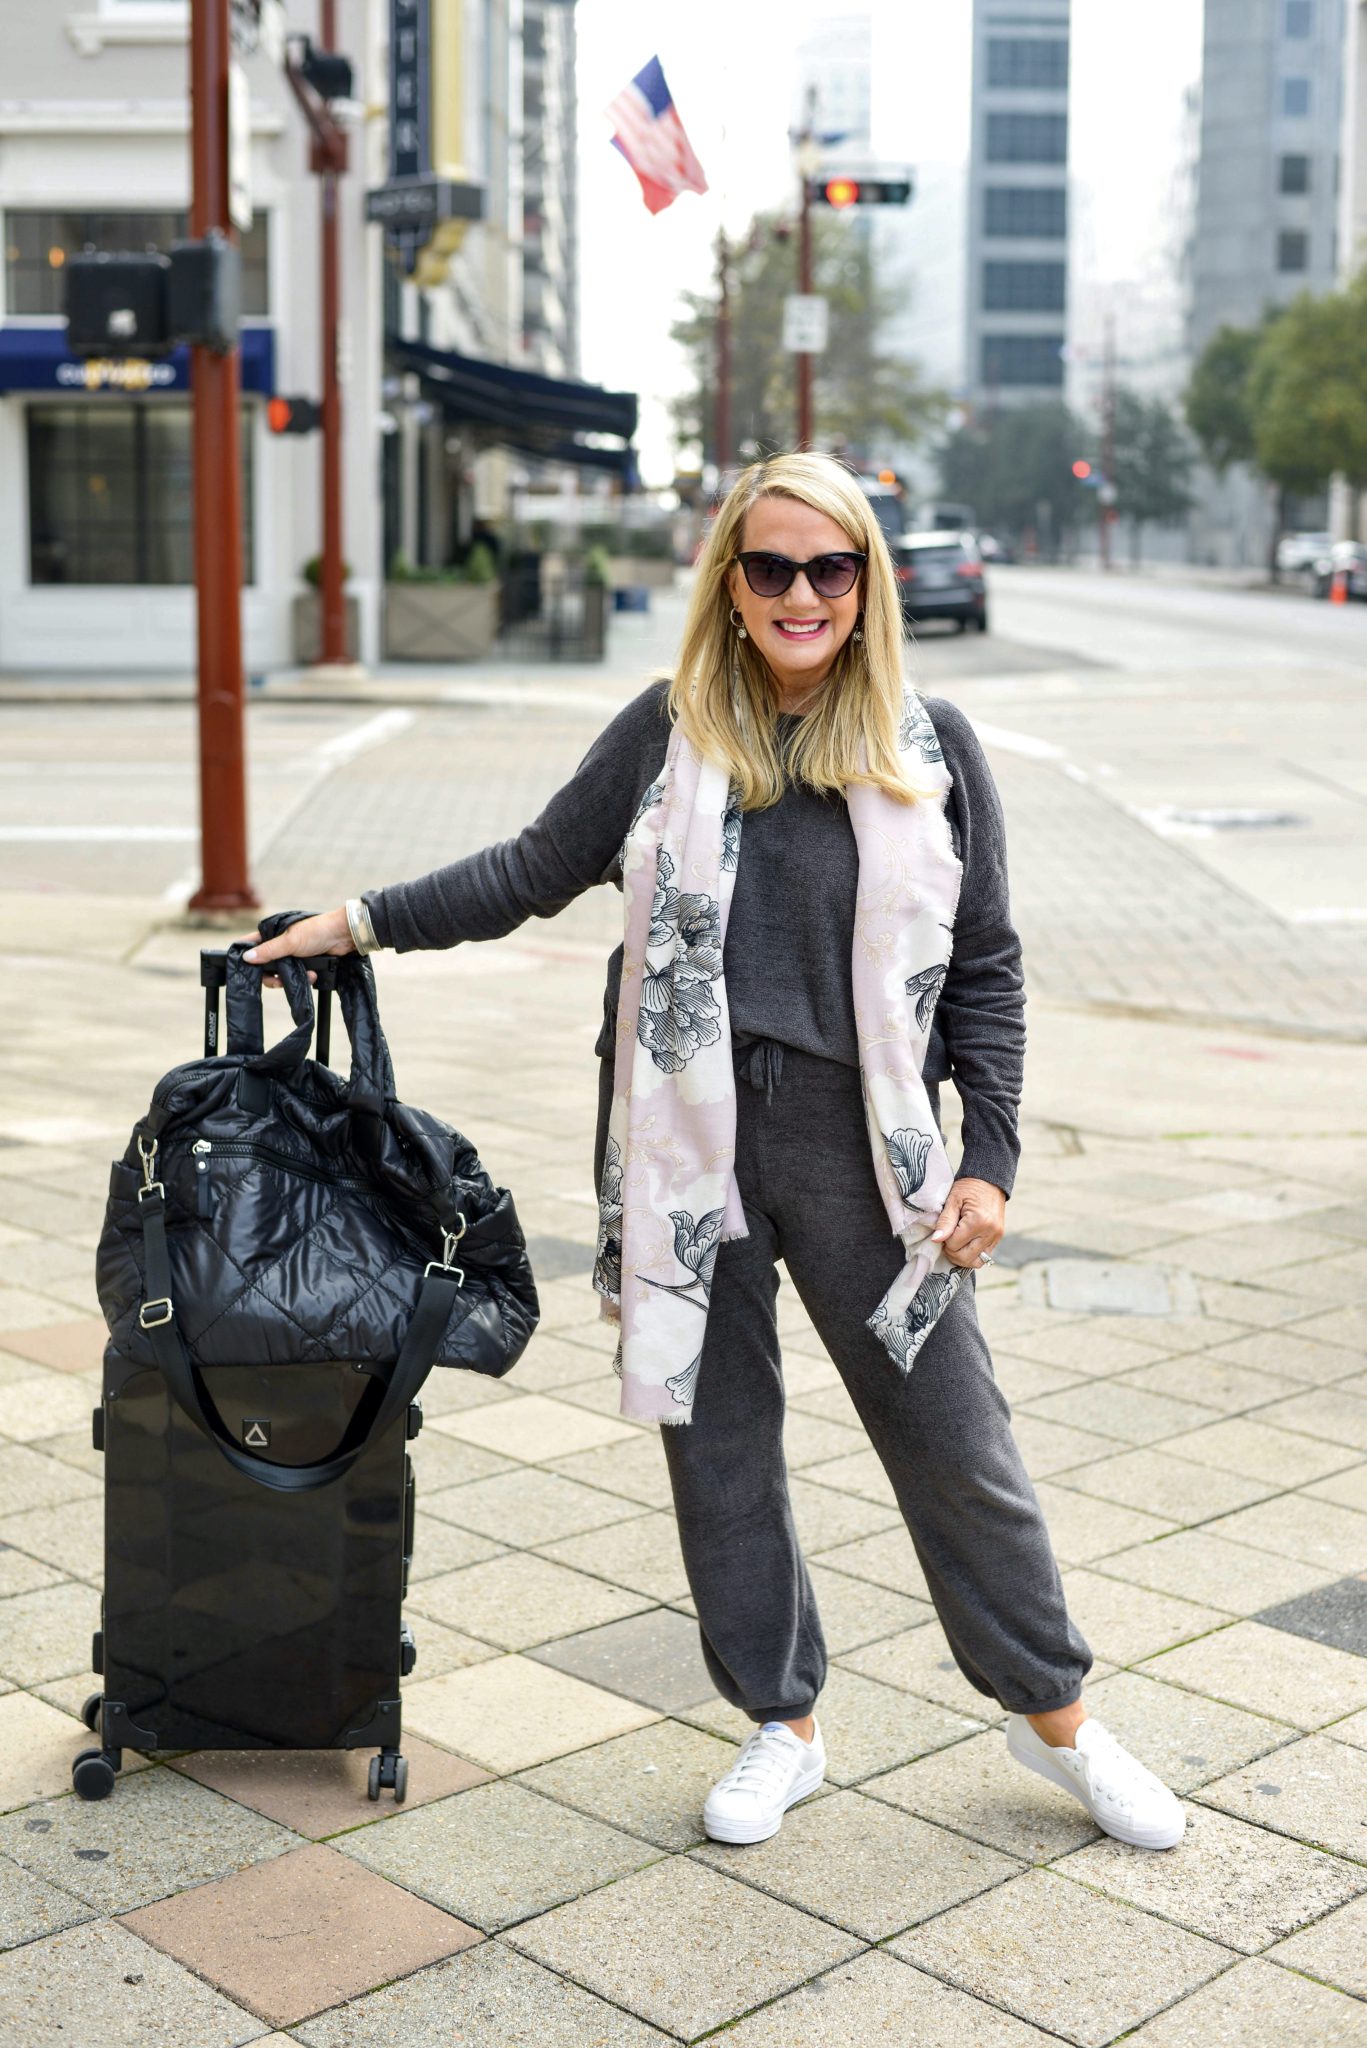 How To Rock Your Weekend Travel Style - The Real Golden Girl